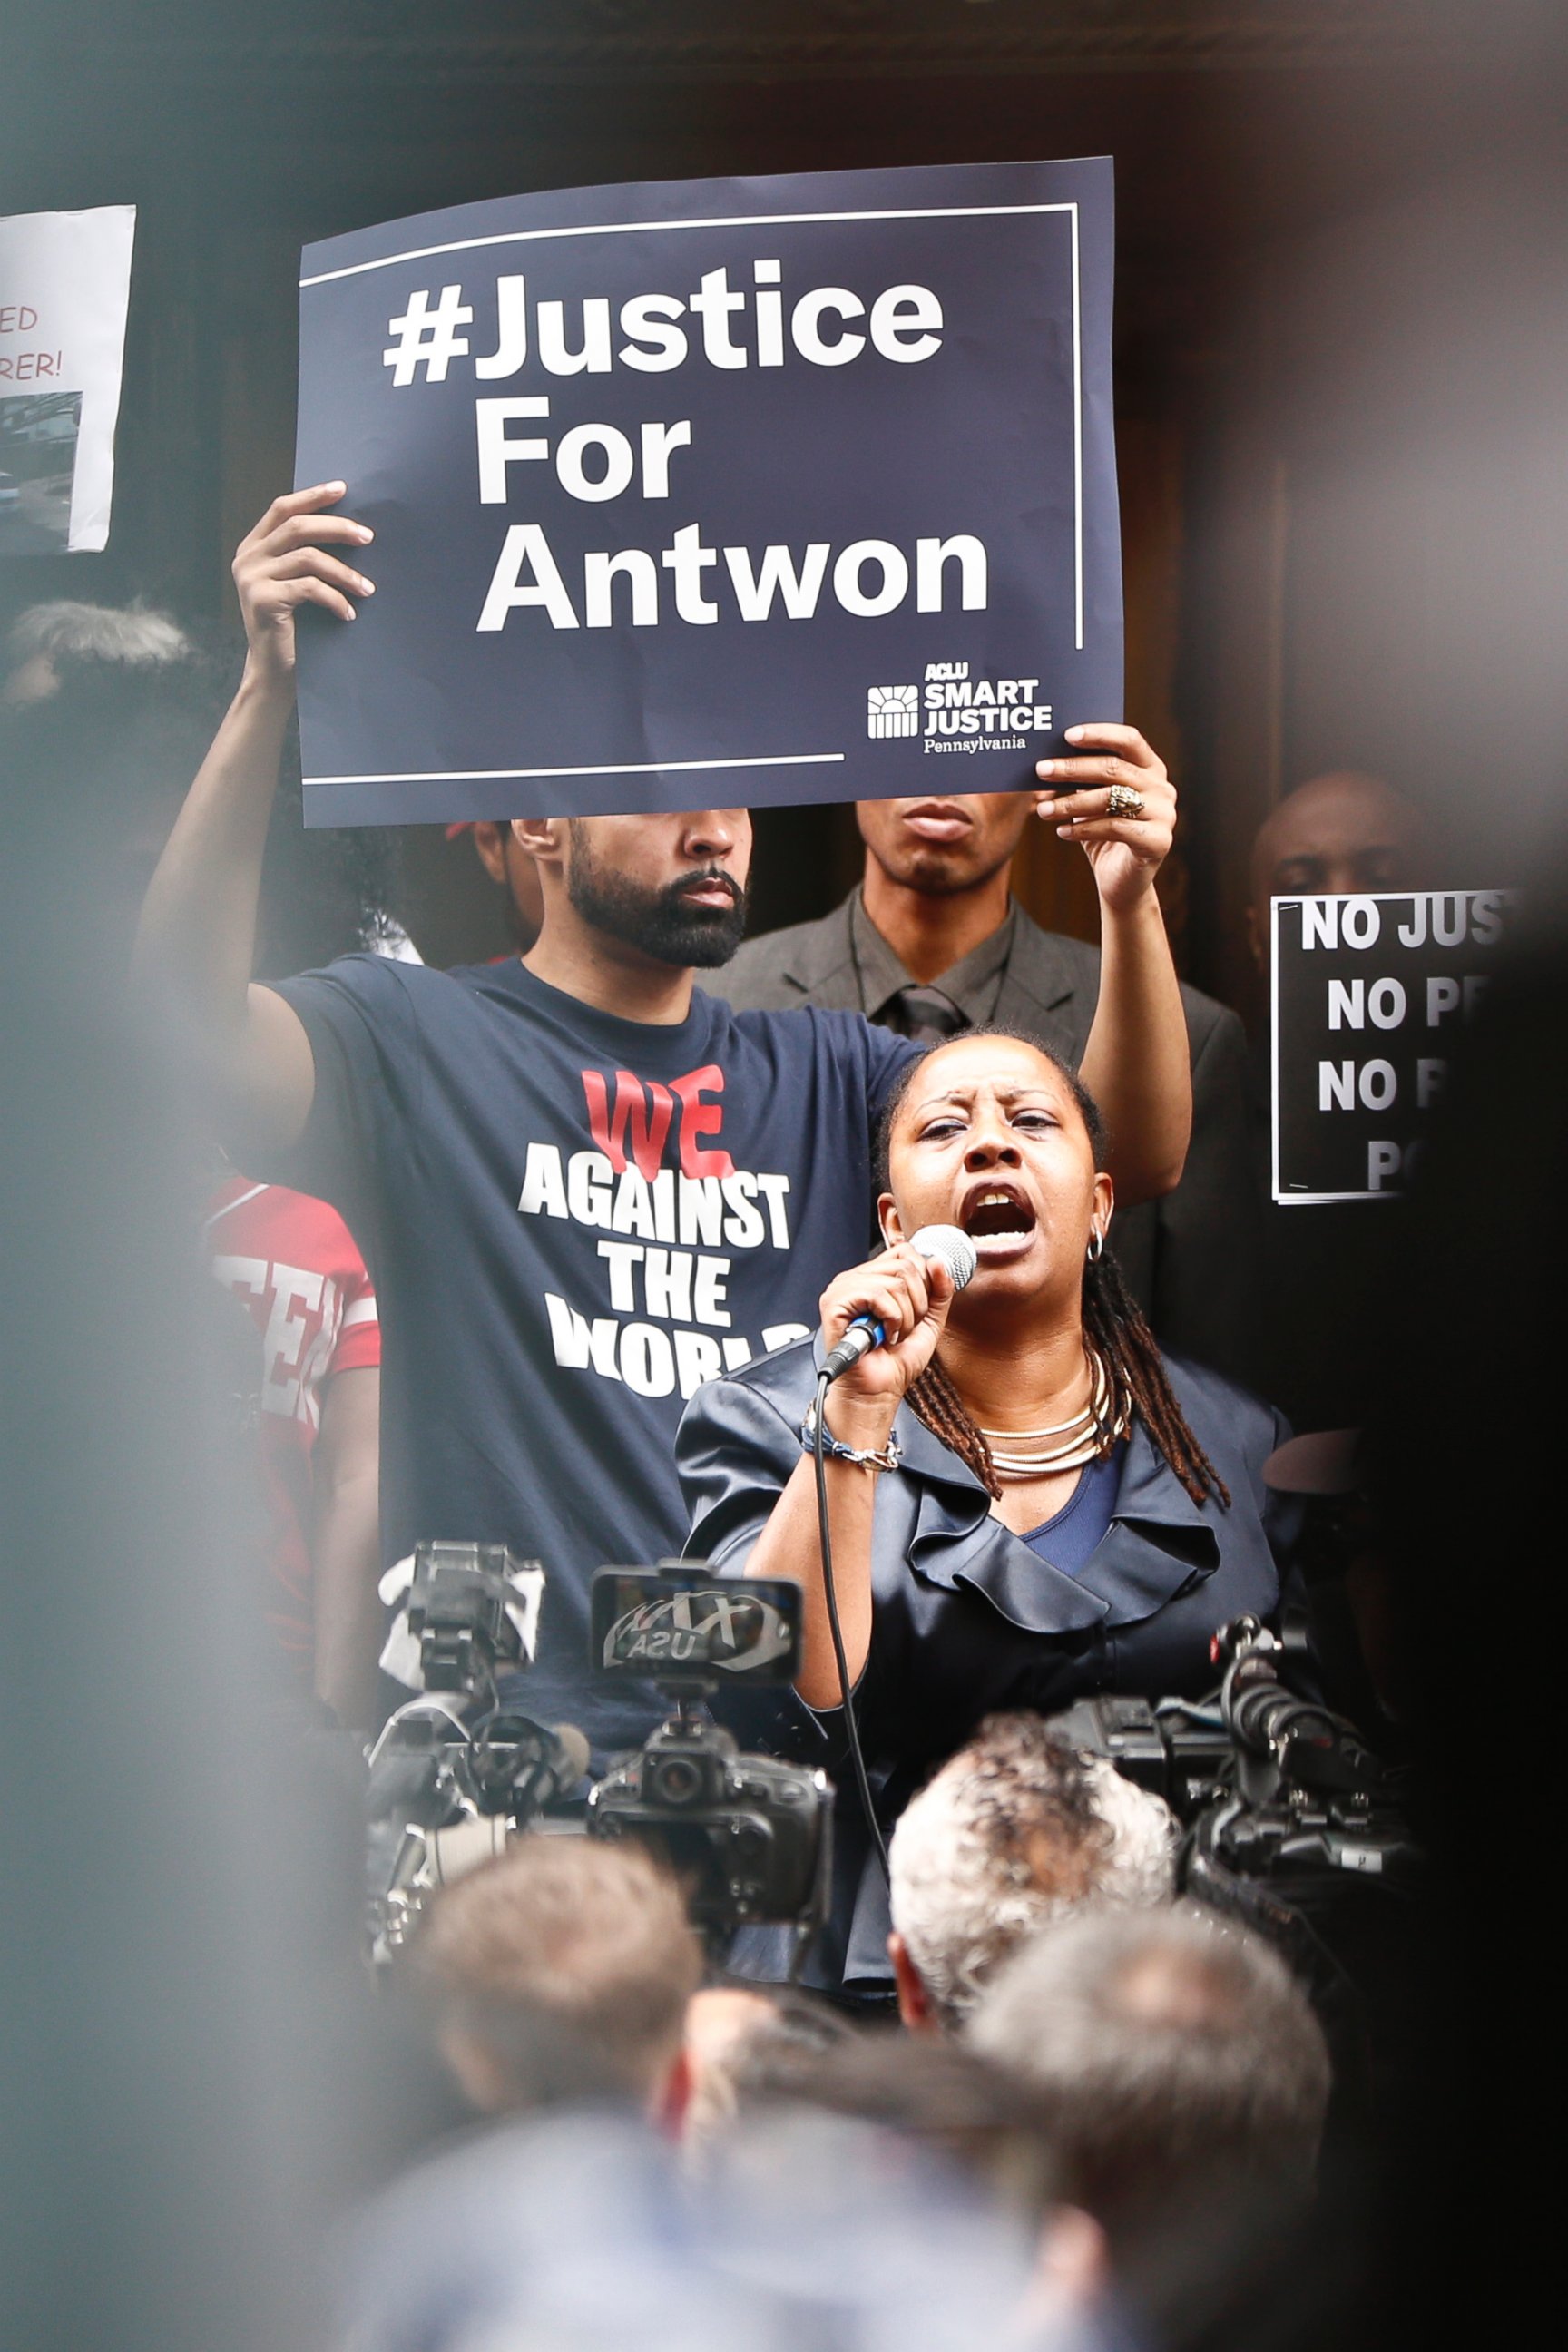 Protesters listen to one of the speakers as they rally in front of the Allegheny County Courthouse on Thursday, June 21, 2018, in Pittsburgh. Antwon Rose Jr. was fatally shot by a police officer seconds after he fled a traffic stop late Tuesday.